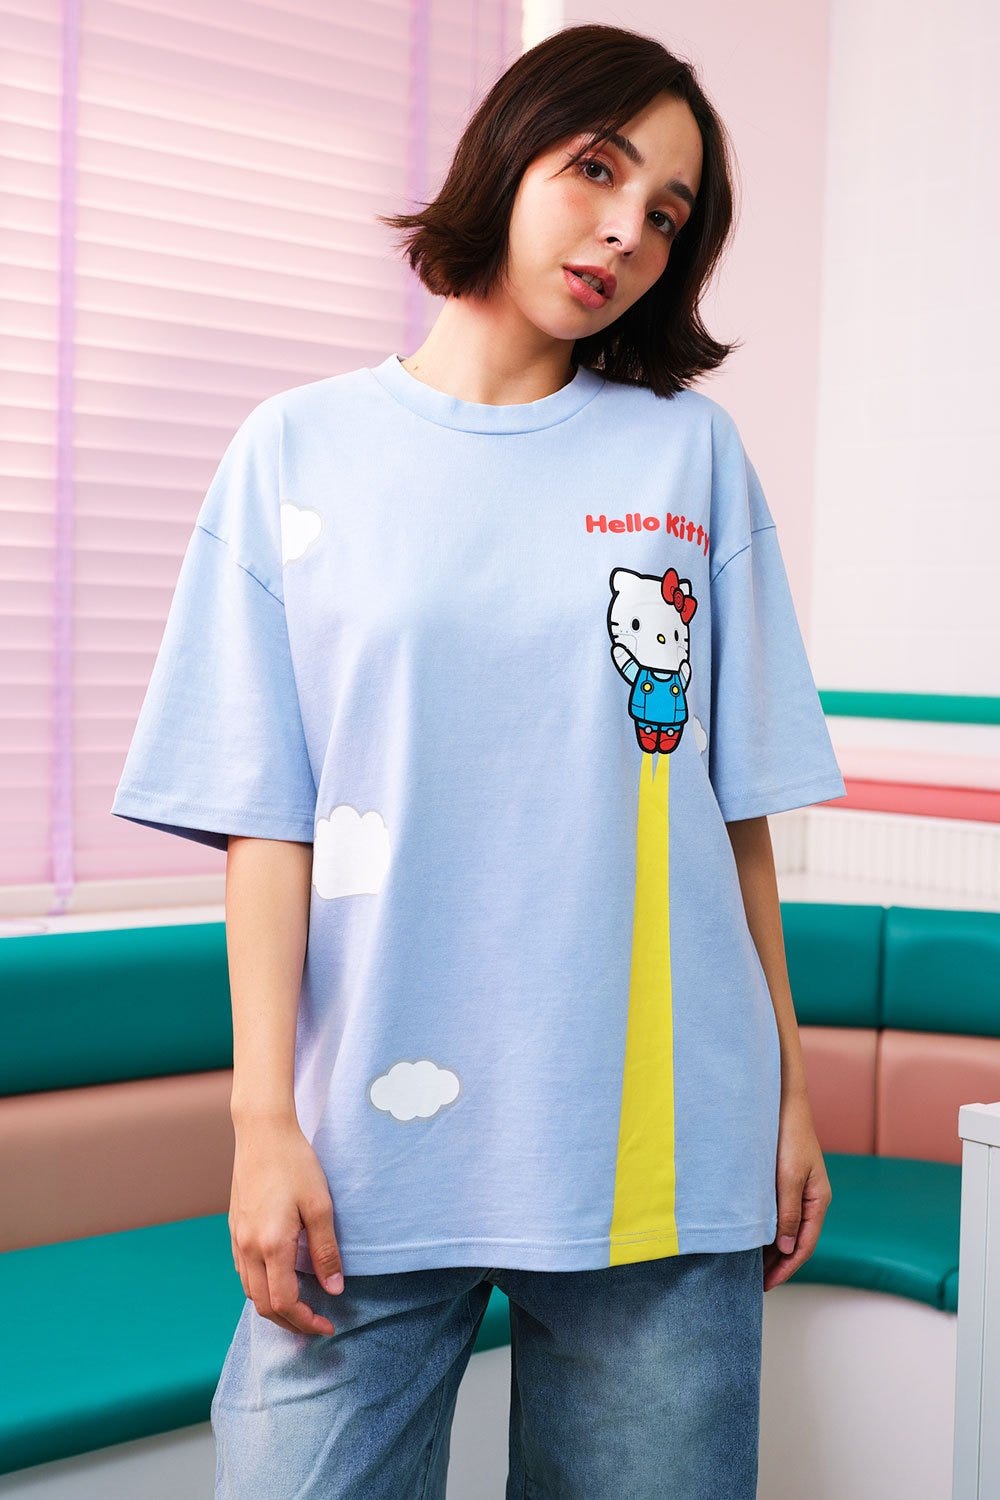 Woman wearing Sky High Oversized T-shirt by Bonkers Corner, smiling.